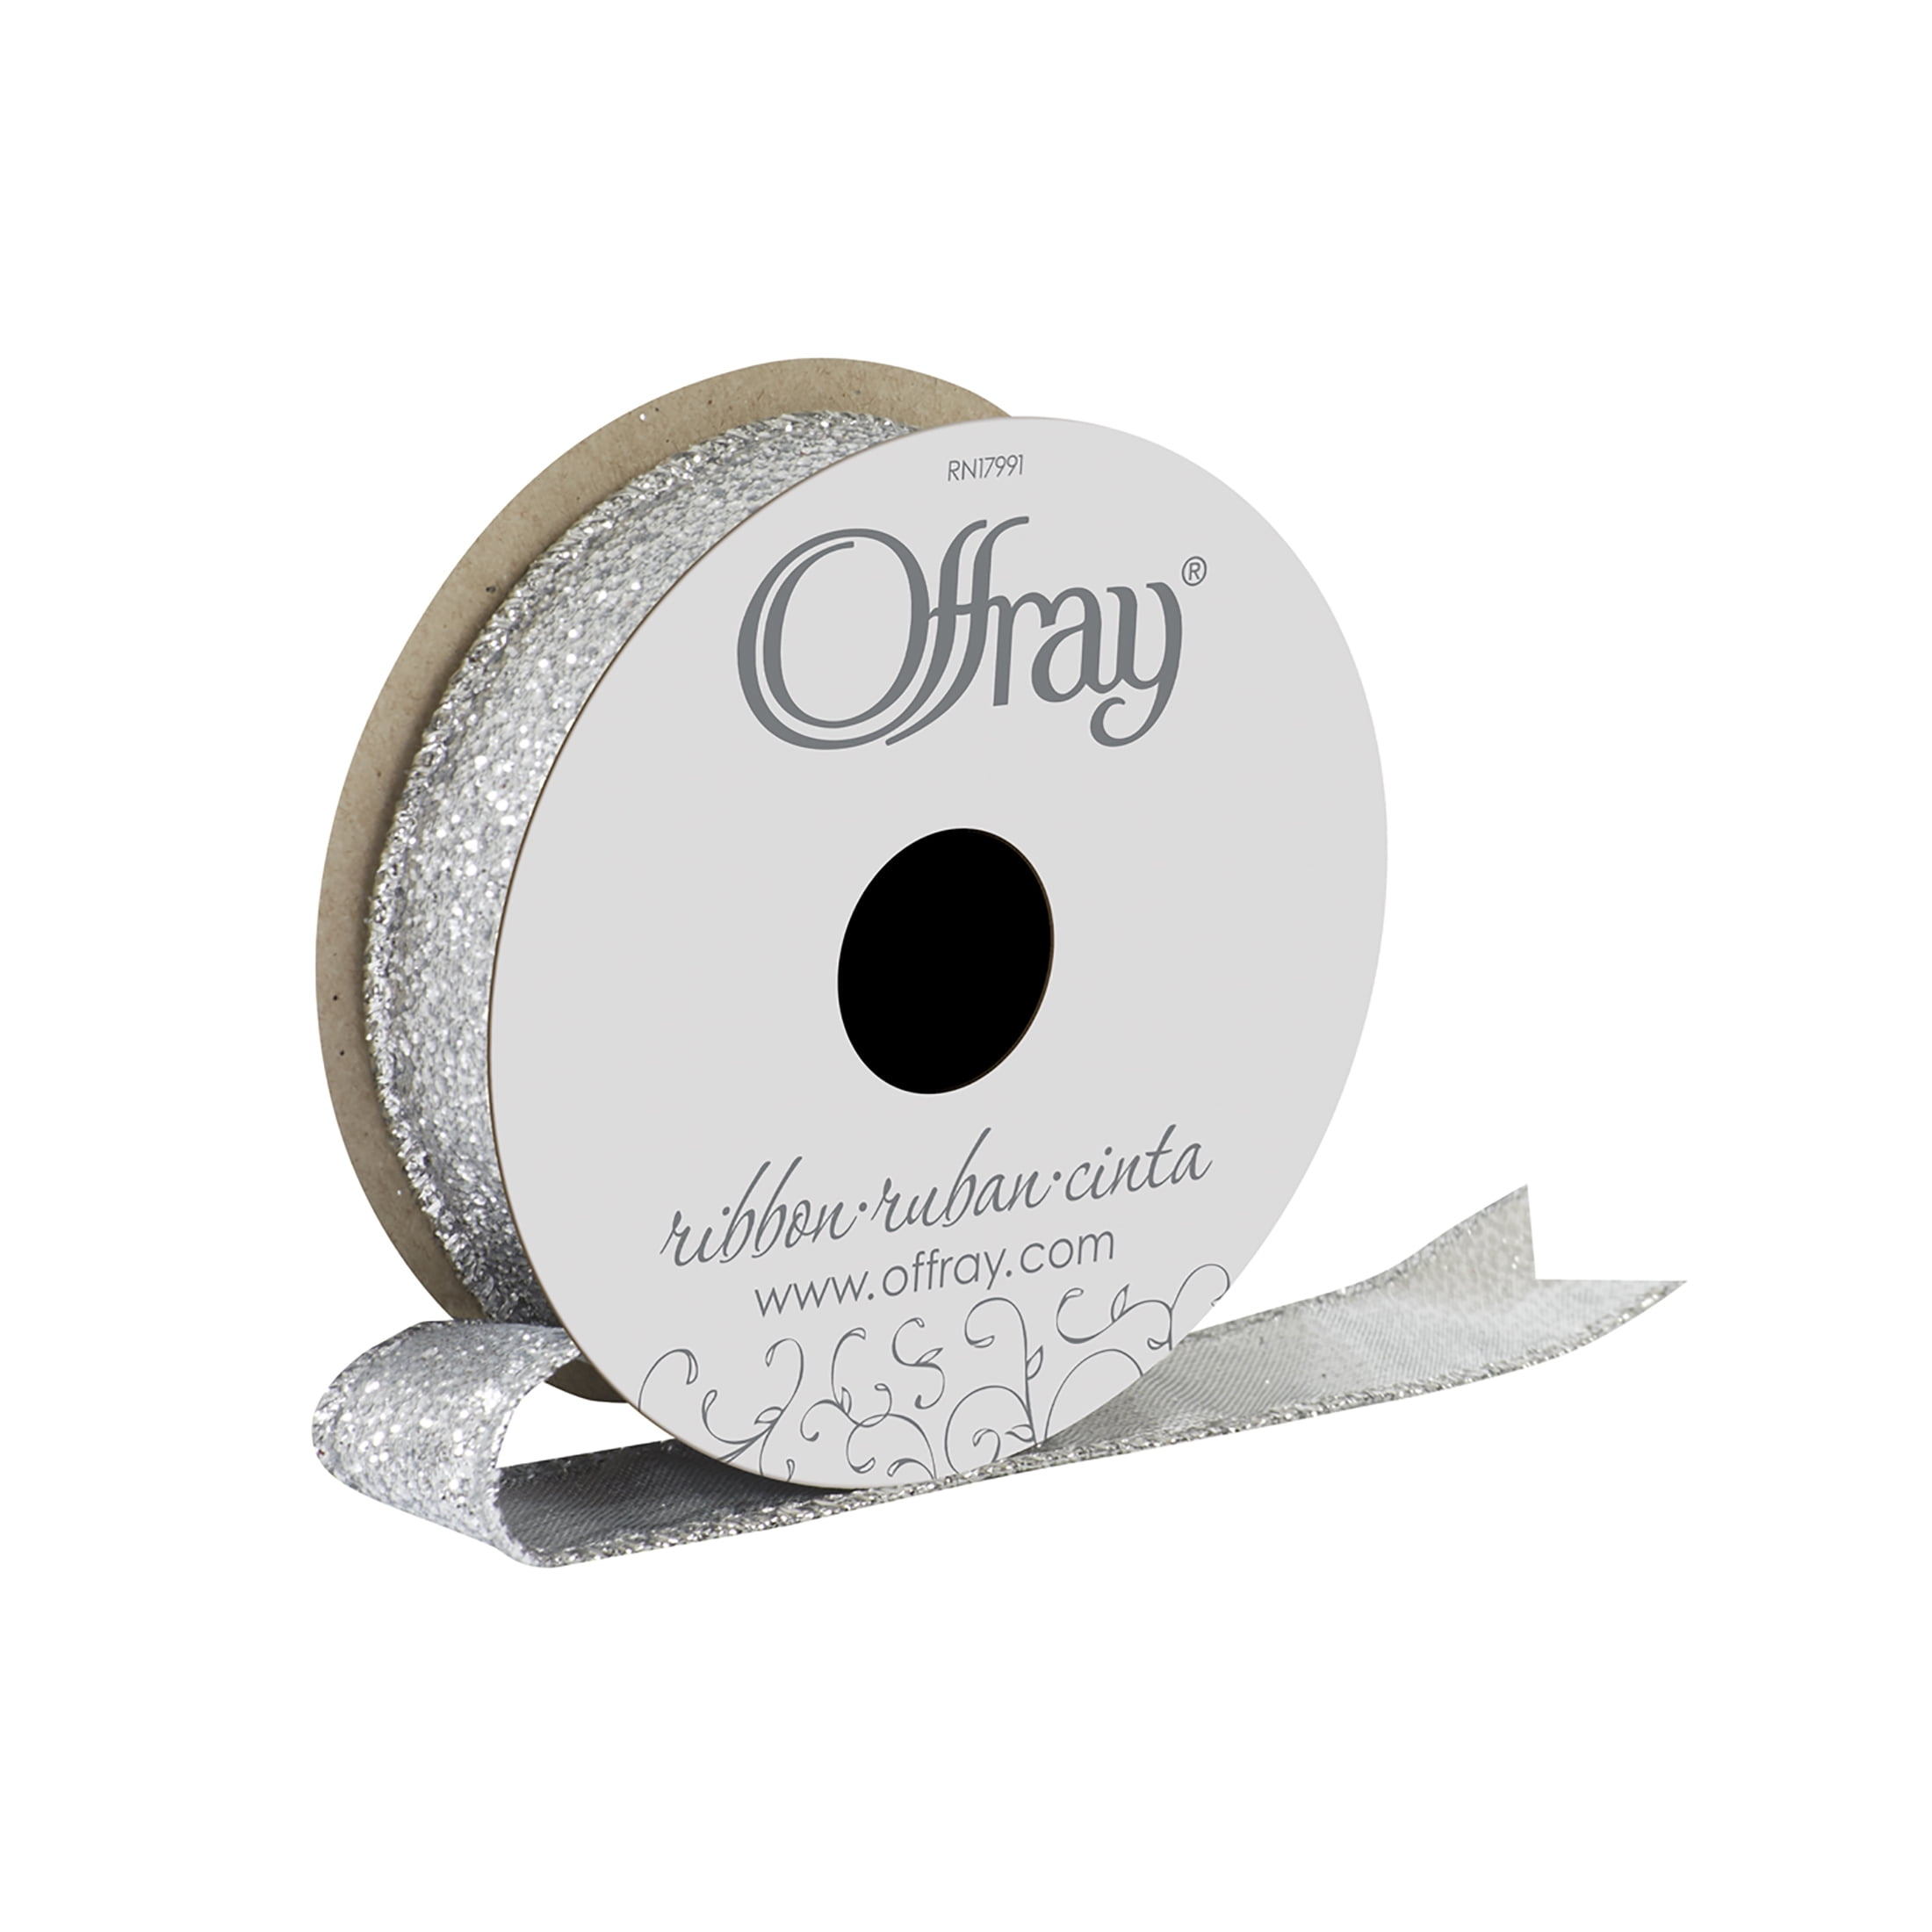 Offray Ribbon, Silver 7/8 inch Wired Edge Metallic Ribbon for Wedding, Crafts, and Gifting, 9 feet, 1 Each